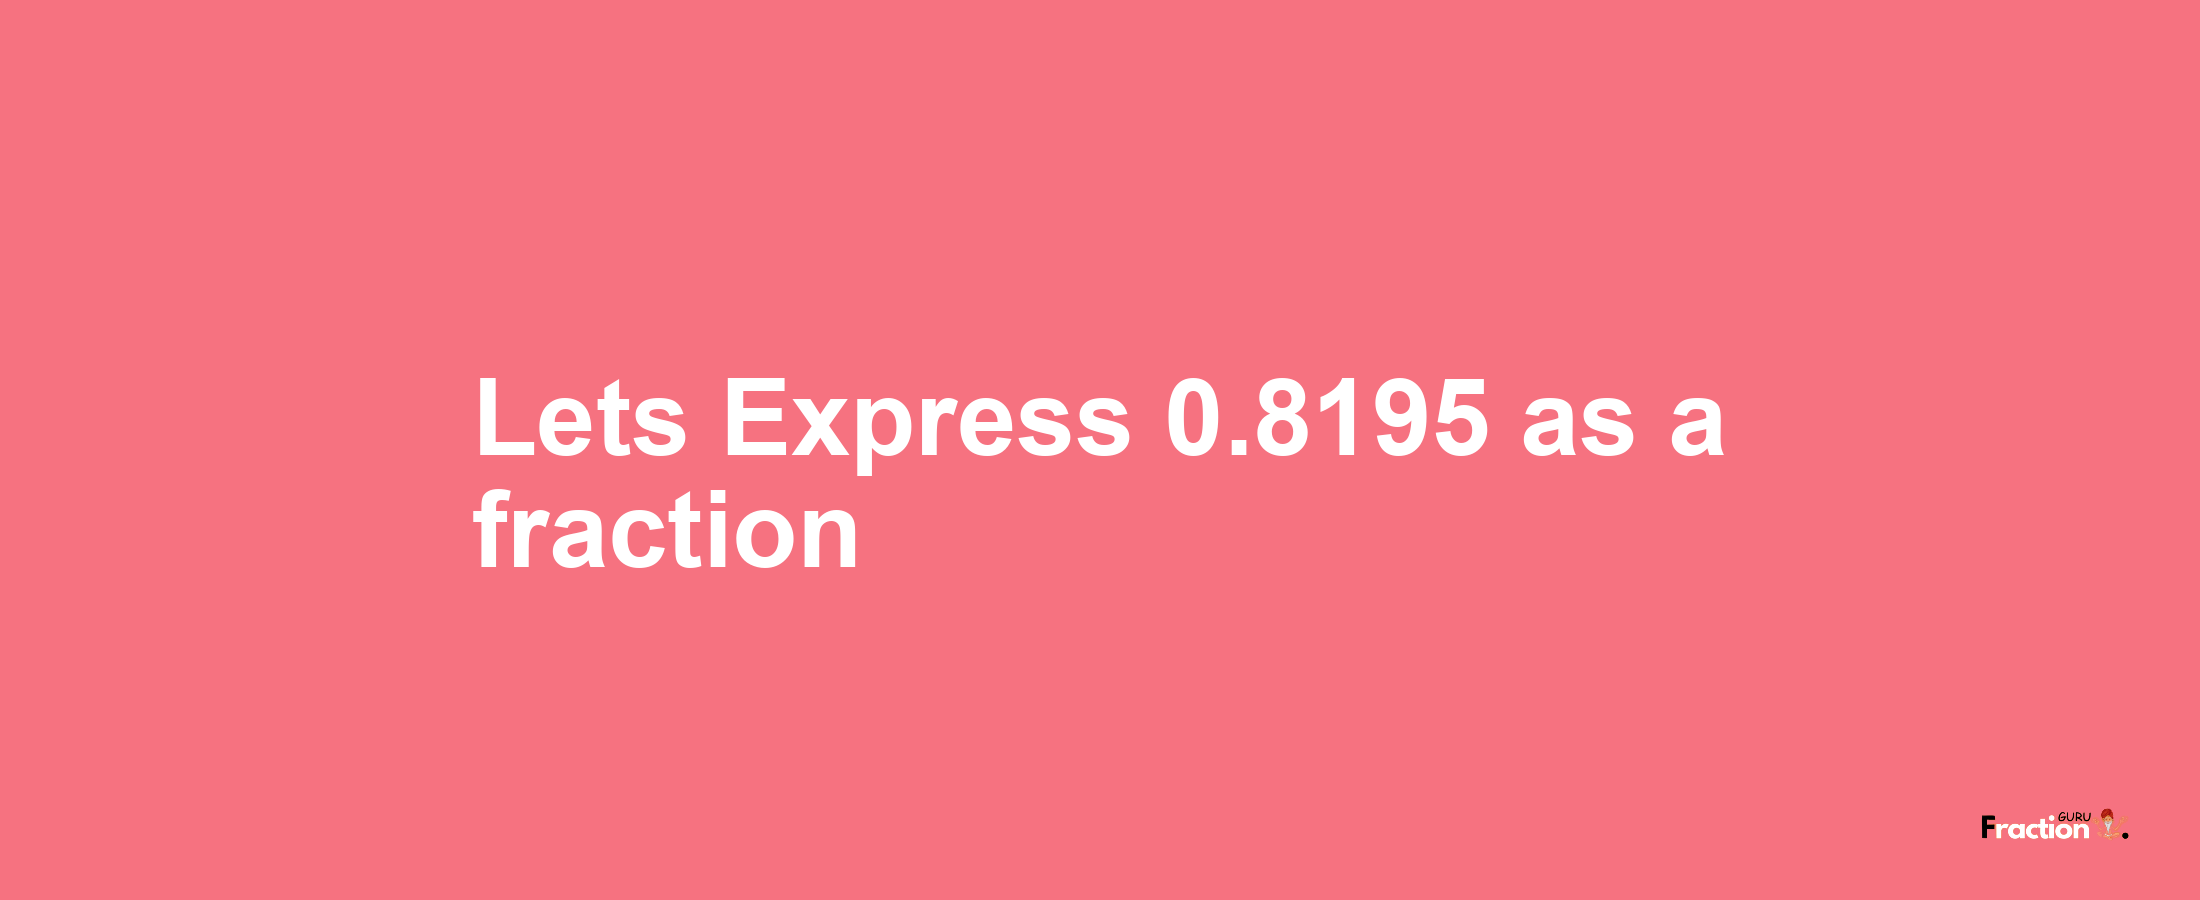 Lets Express 0.8195 as afraction